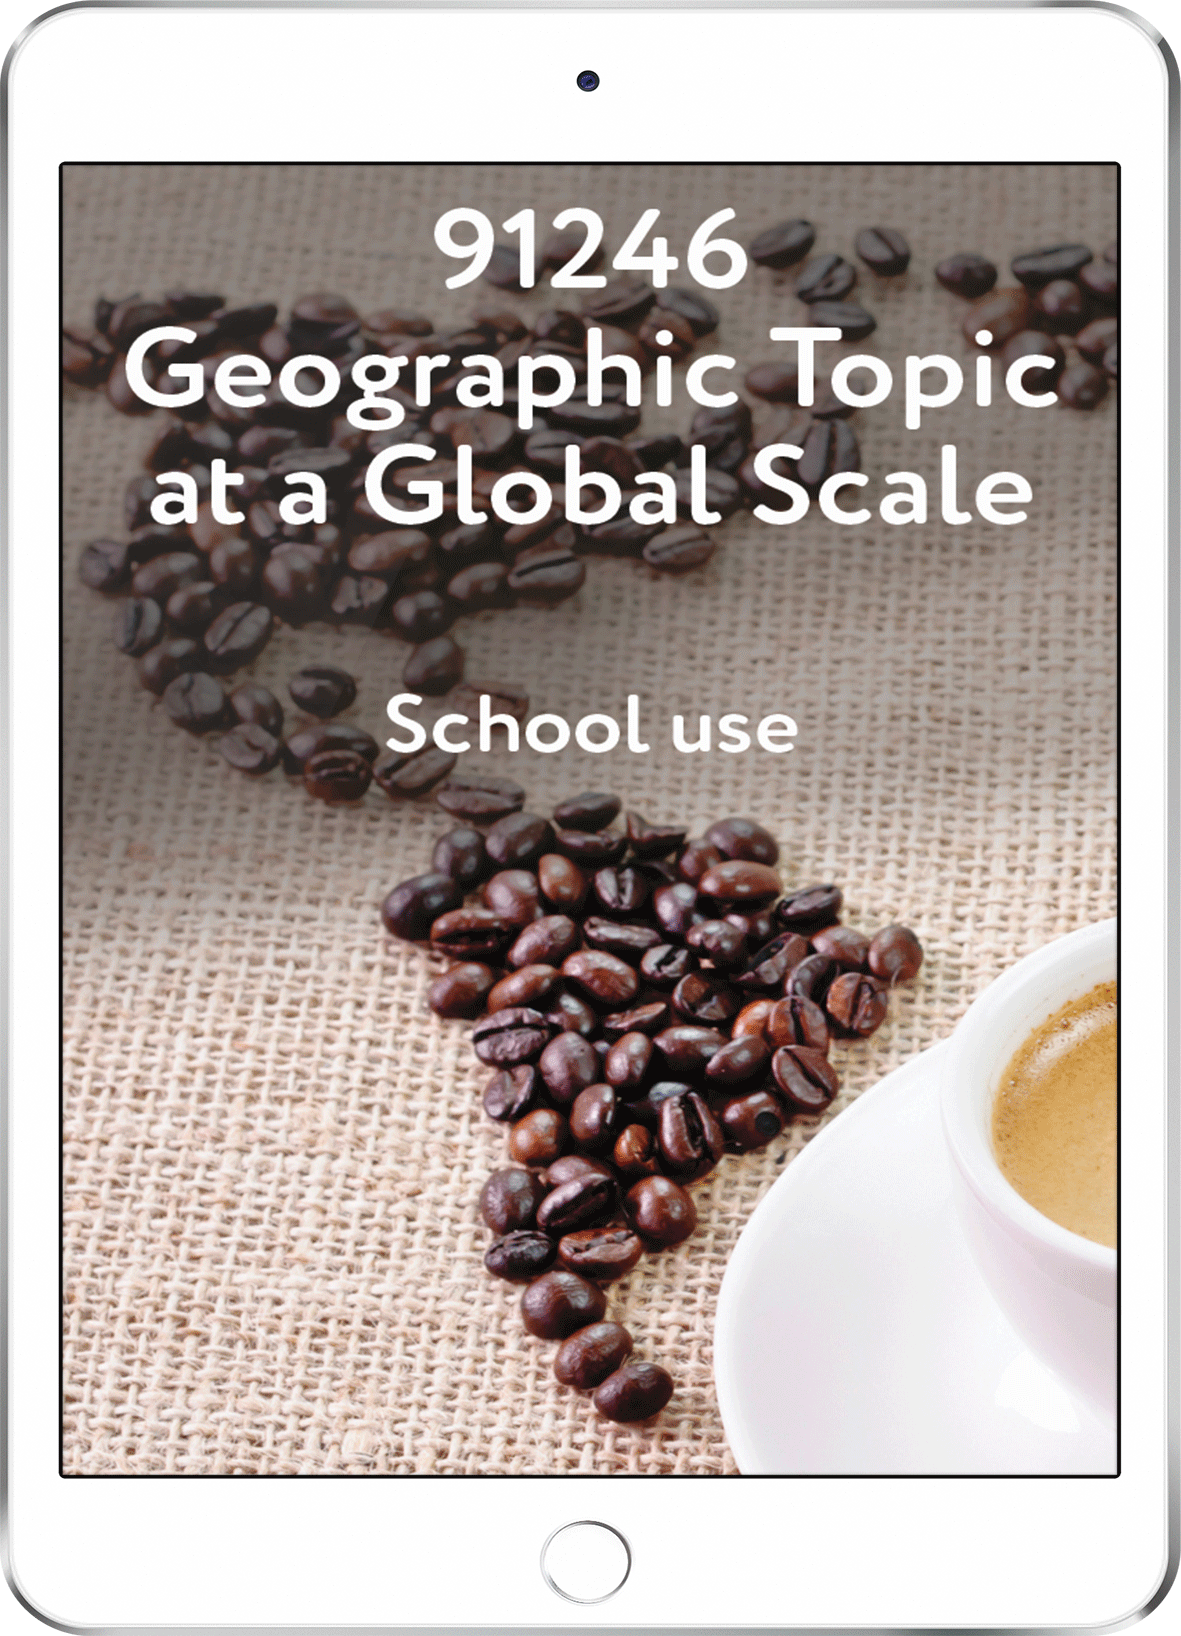 91246 Geographic Topic at a Global Scale - School Use